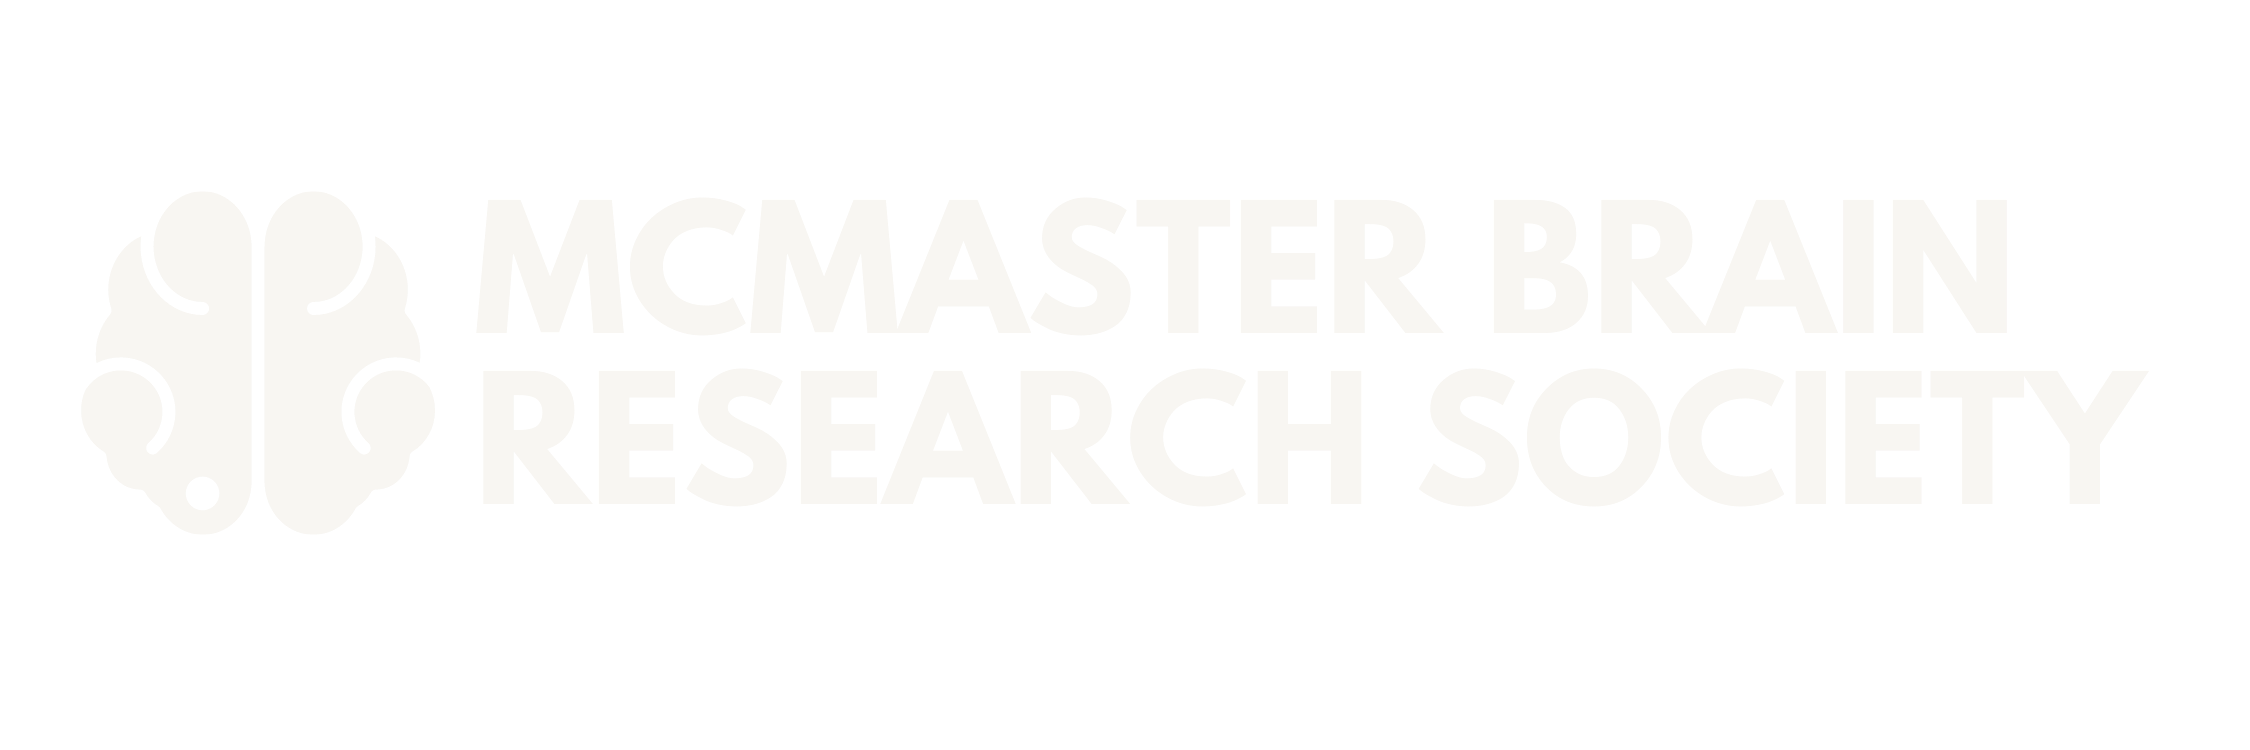 McMaster Brain Research Society